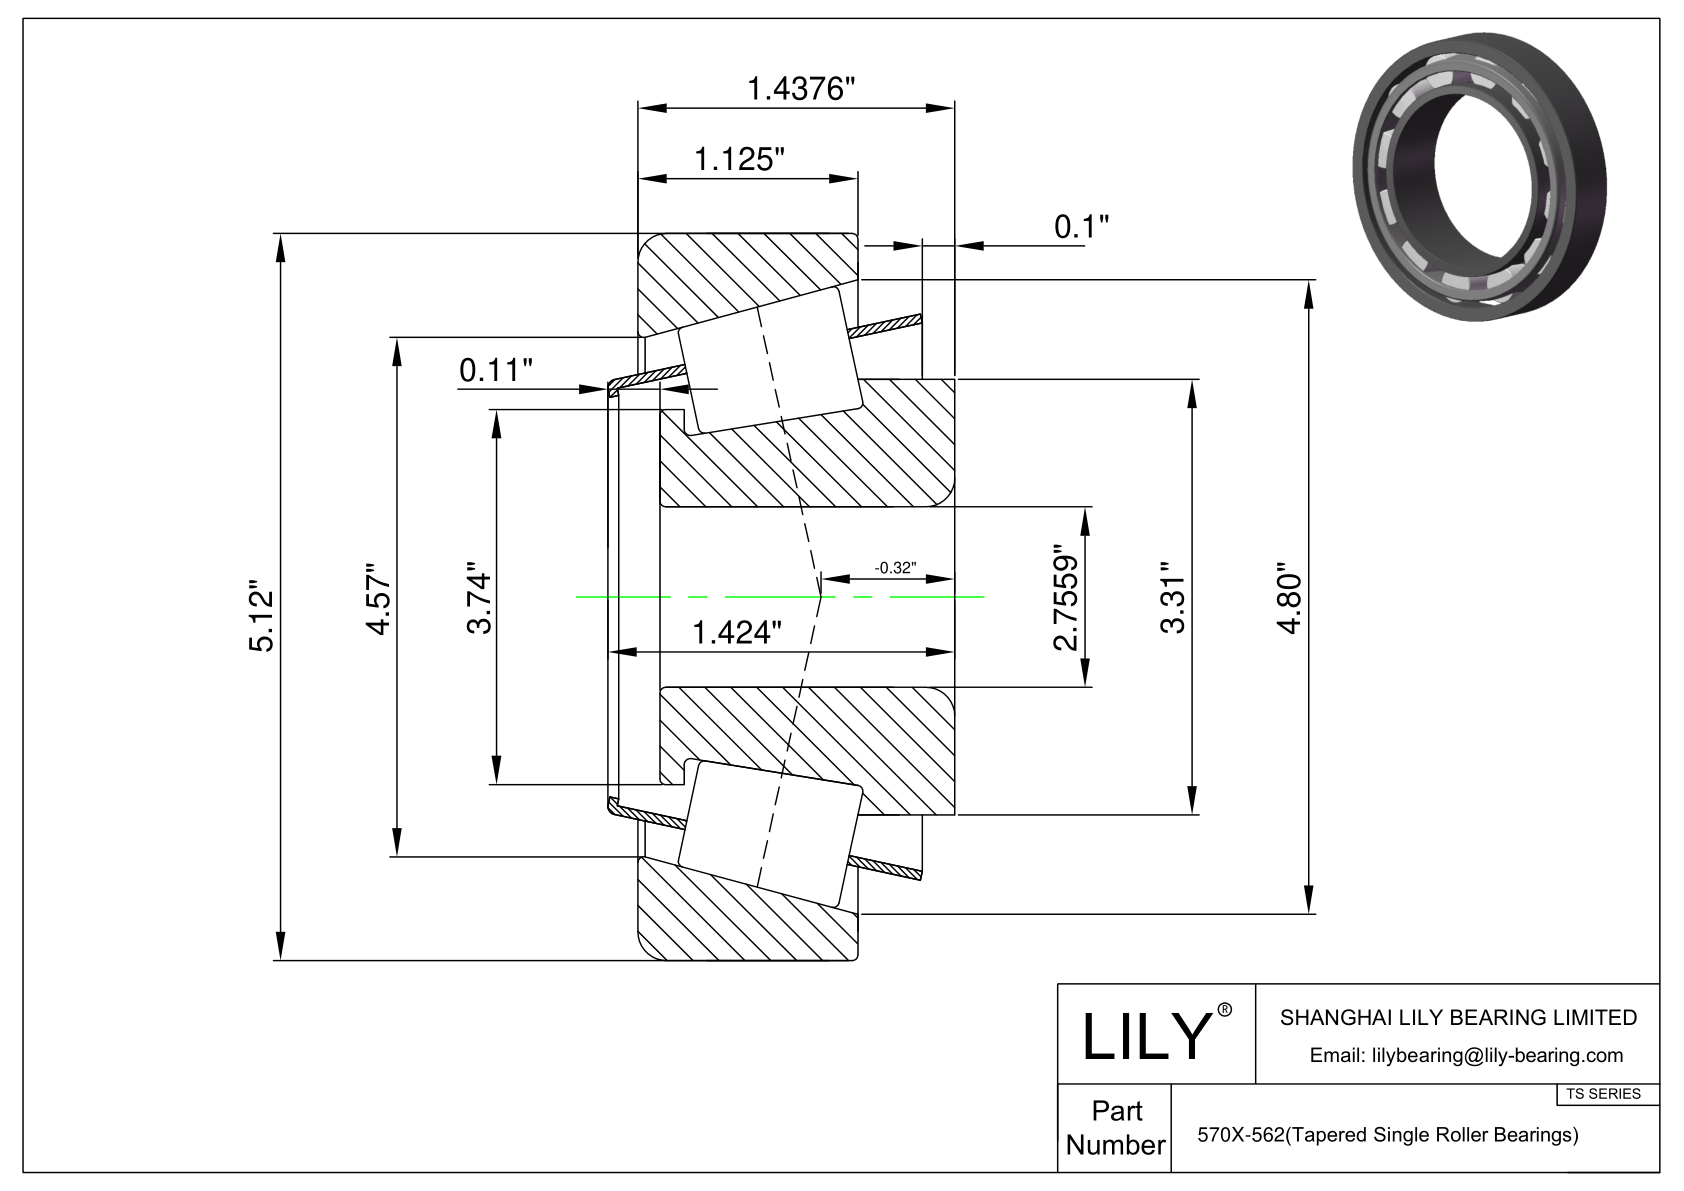 570X-562 TS (Tapered Single Roller Bearings) (Imperial) cad drawing